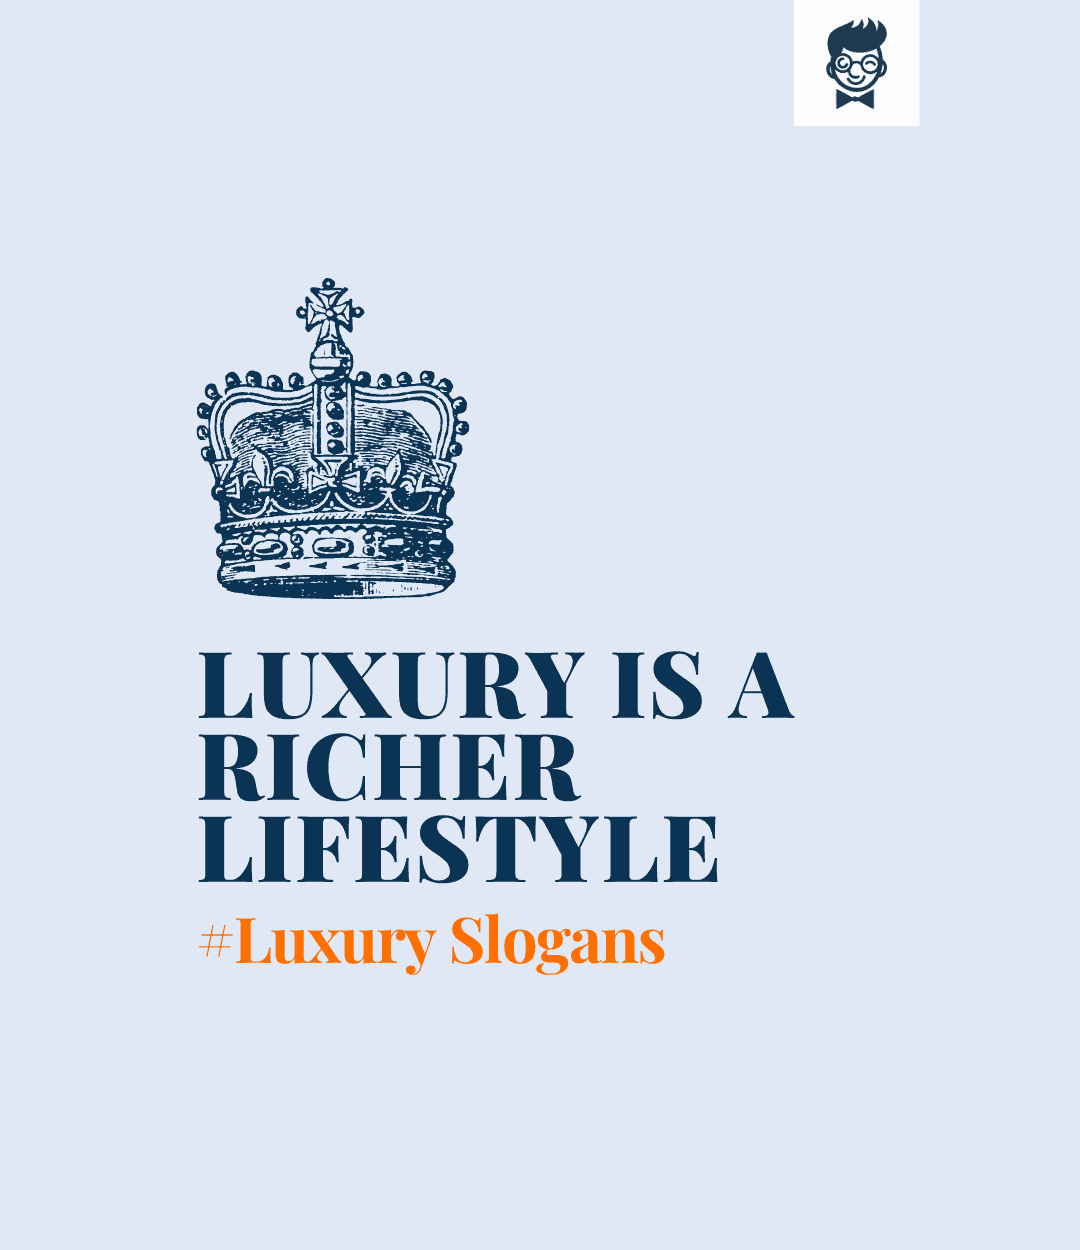 51 Good Luxury Slogans And Taglines Business Slogans - vrogue.co